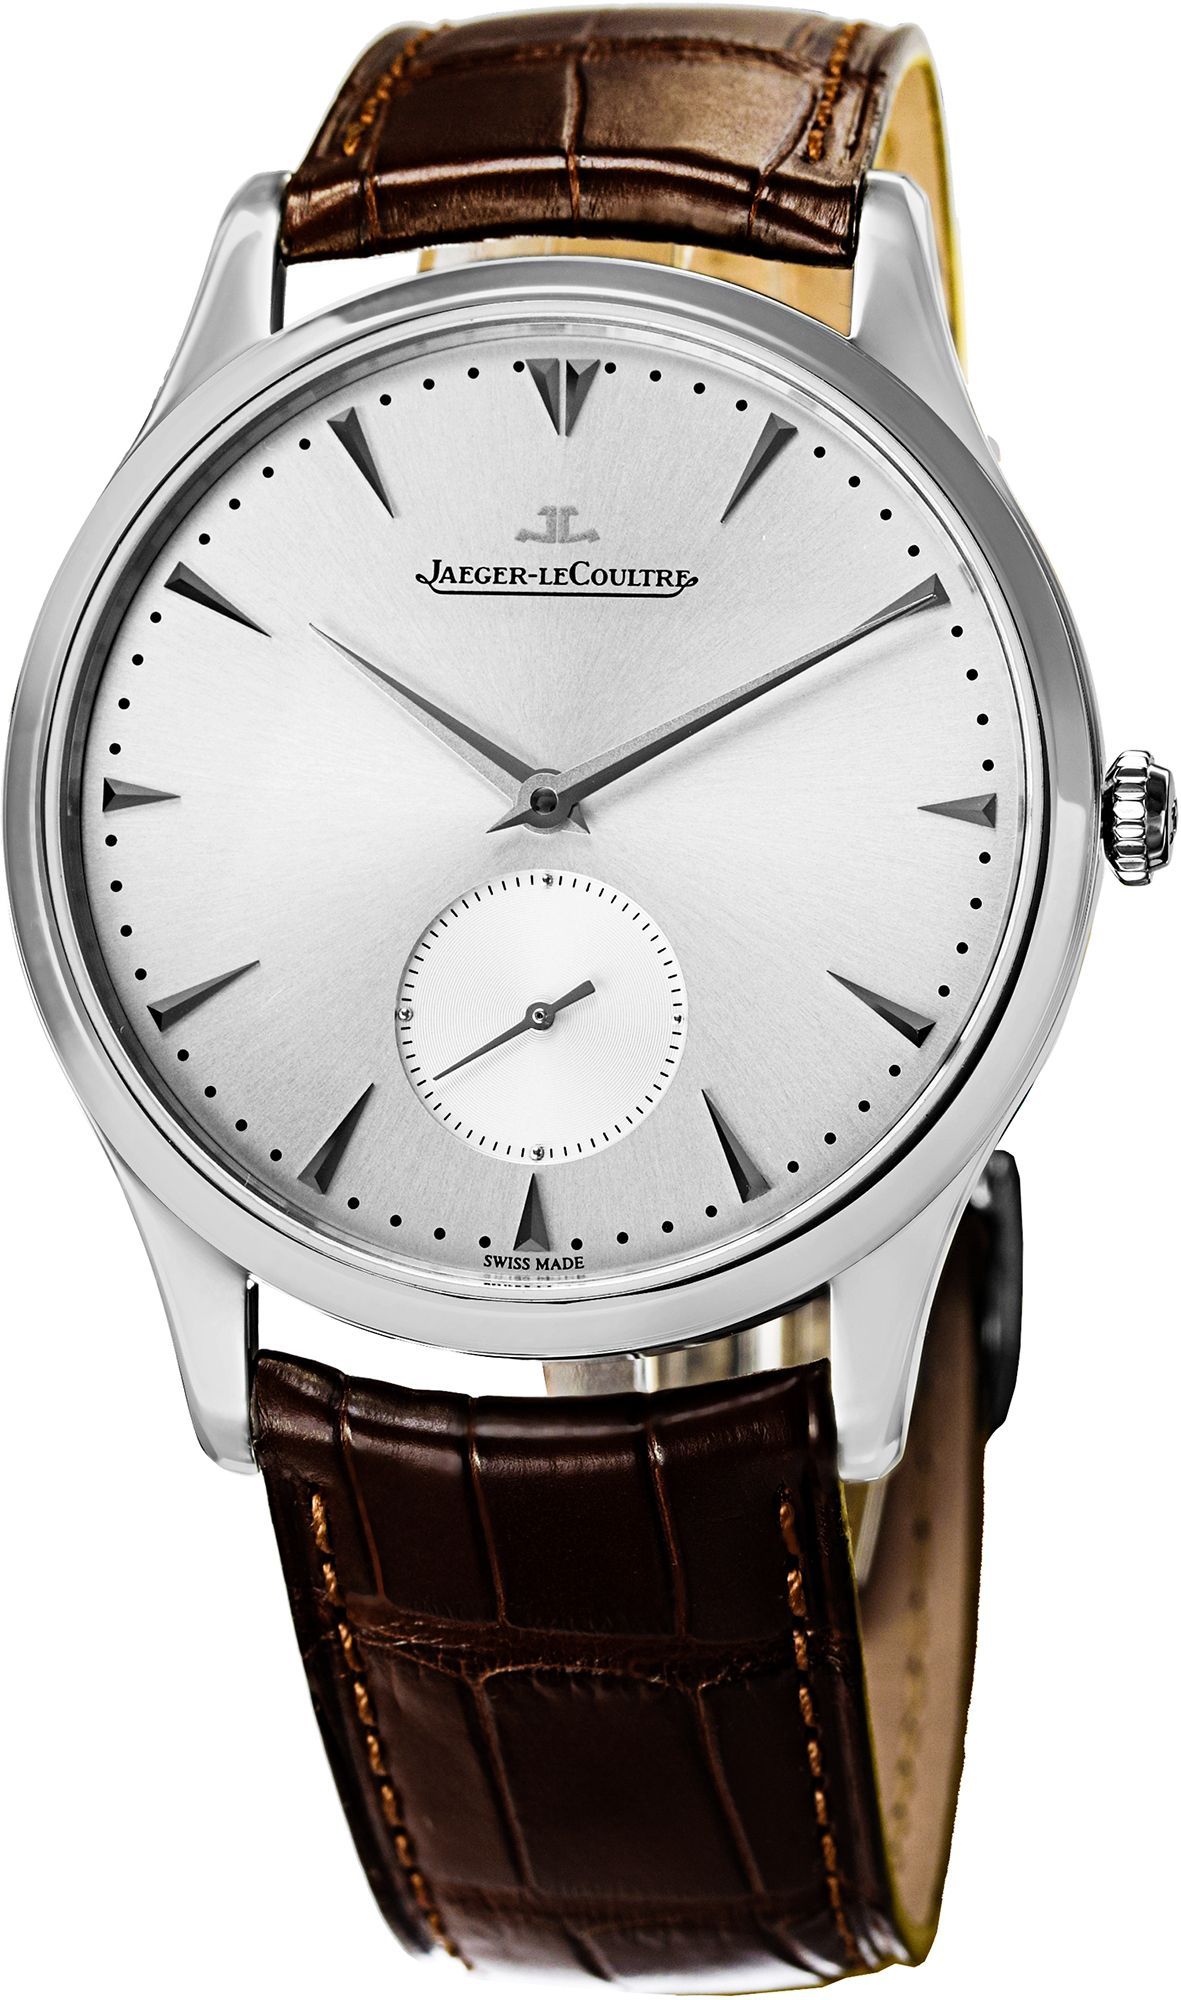 Jaeger-LeCoultre Master Master Ultra Thin Silver Dial 40 mm Automatic Watch For Men - 1